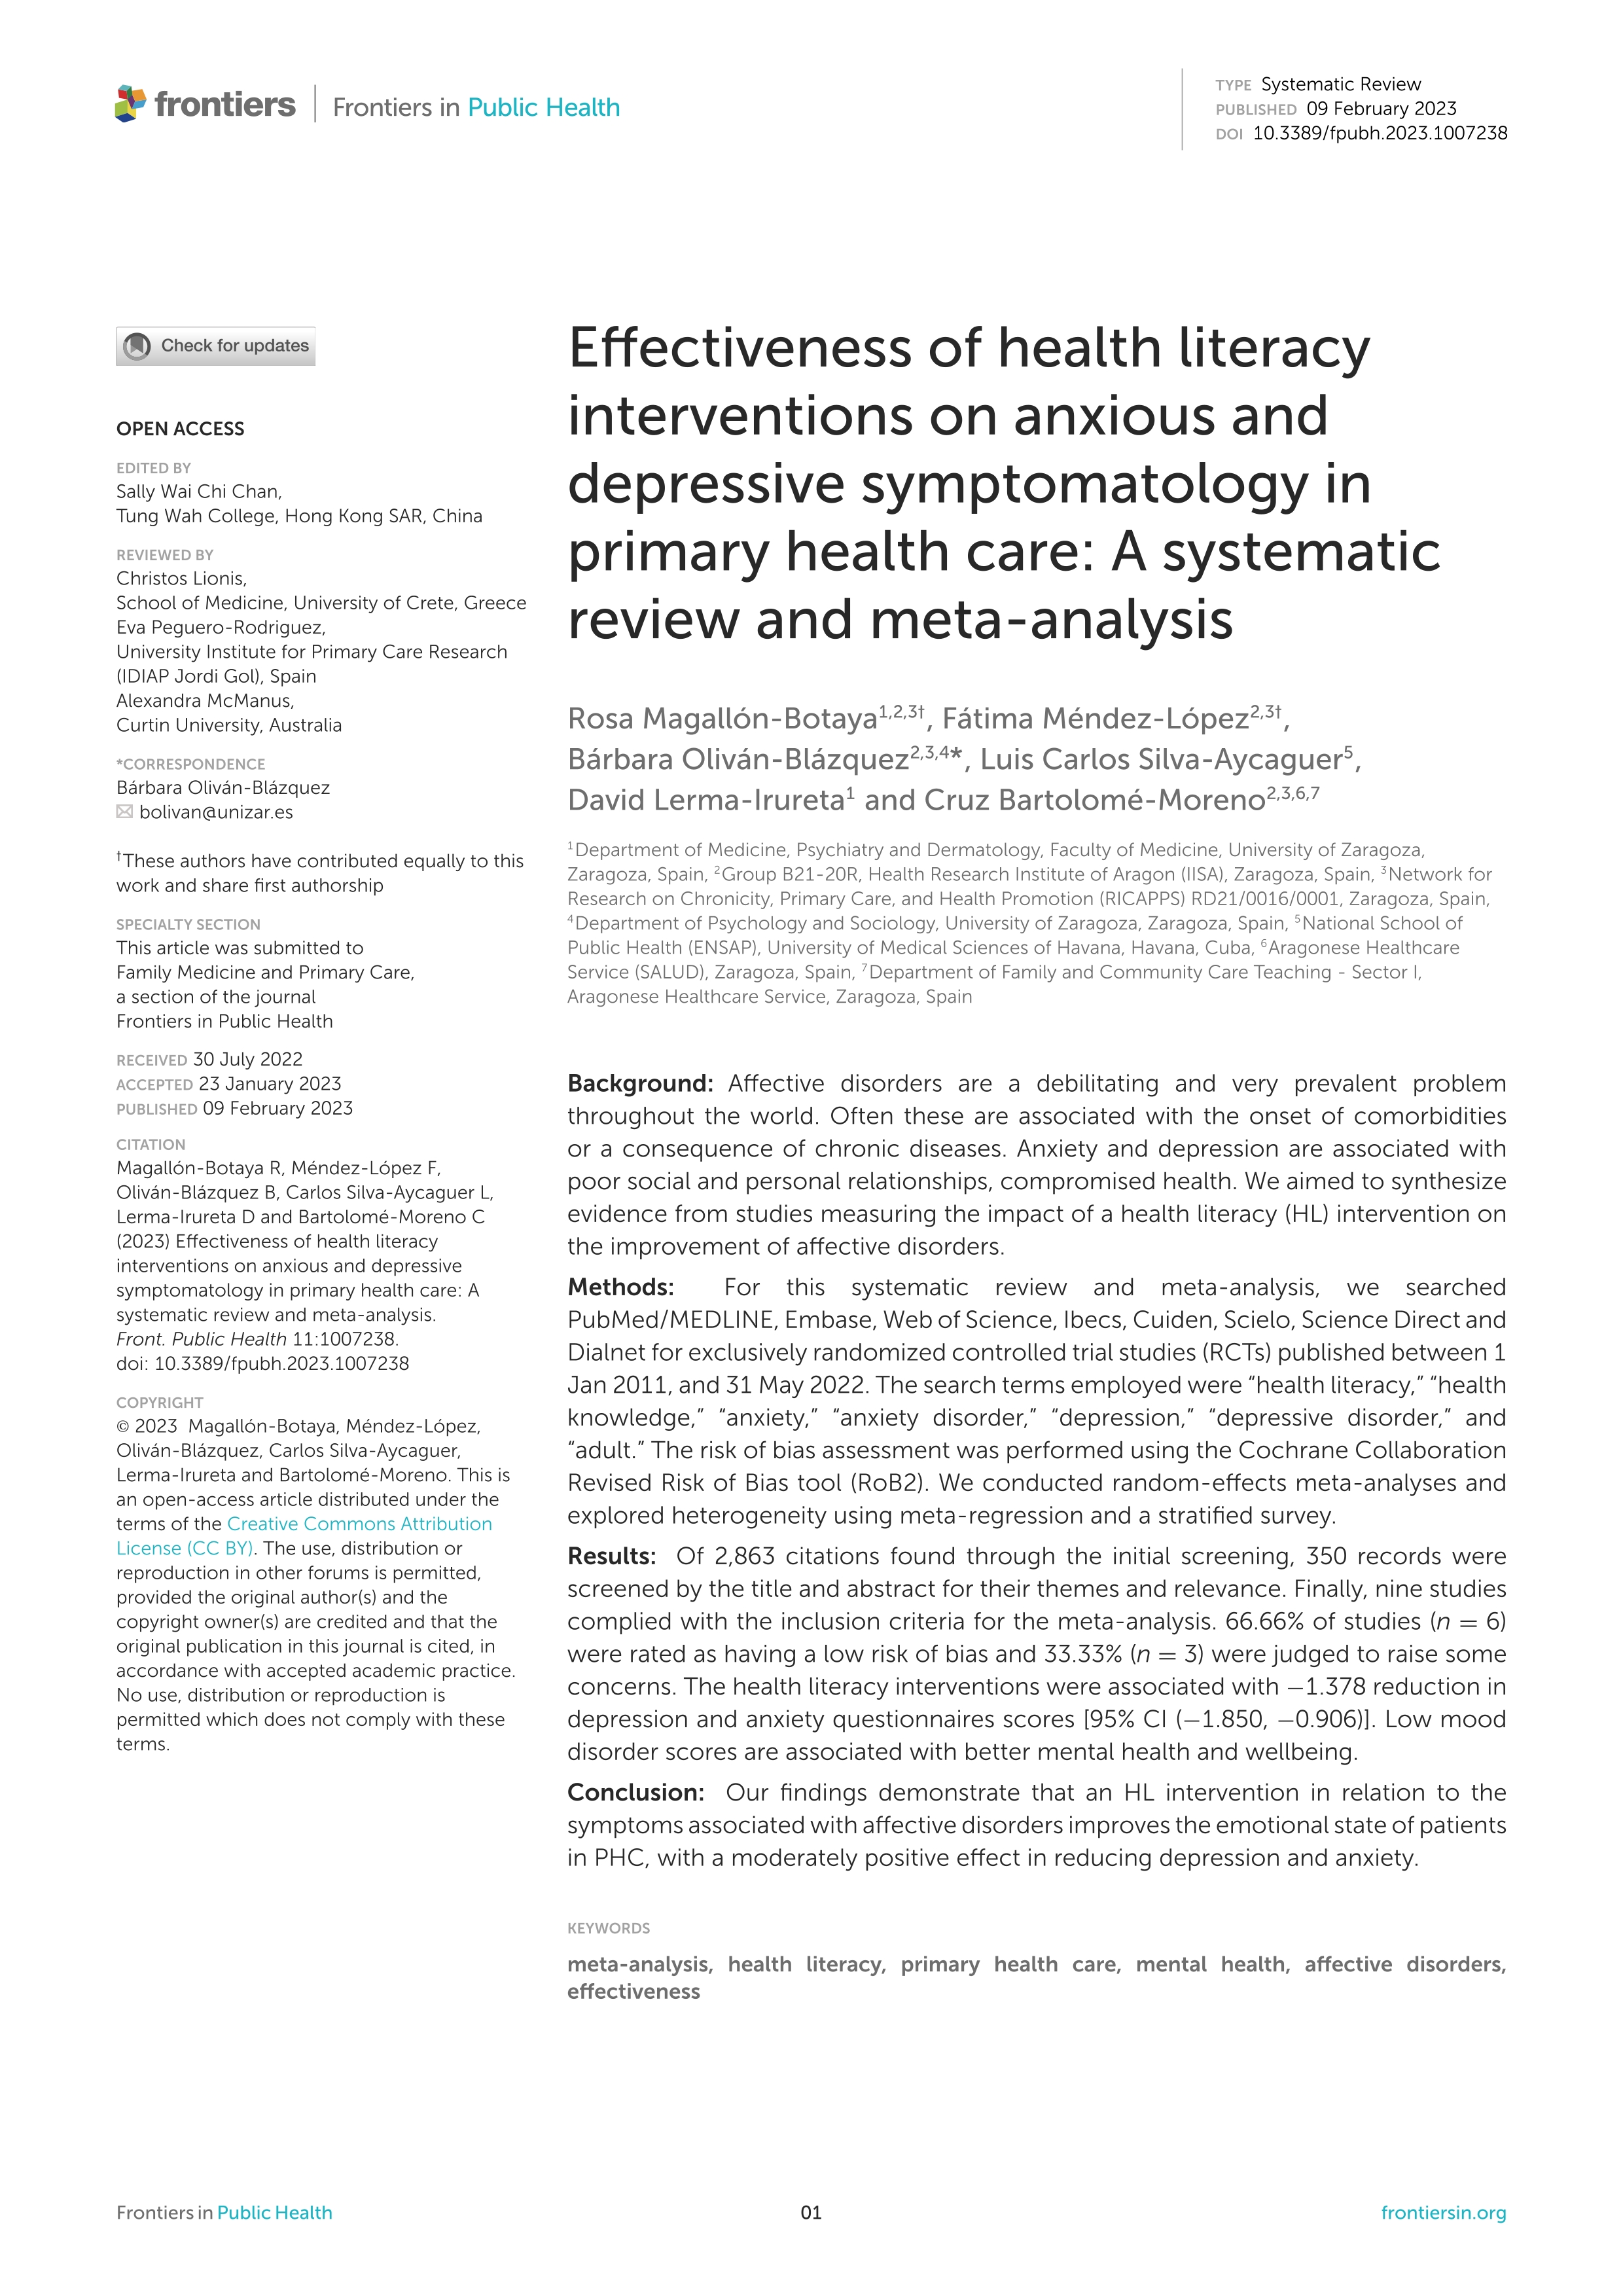 Effectiveness of health literacy interventions on anxious and depressive symptomatology in primary health care: A systematic review and meta-analysis